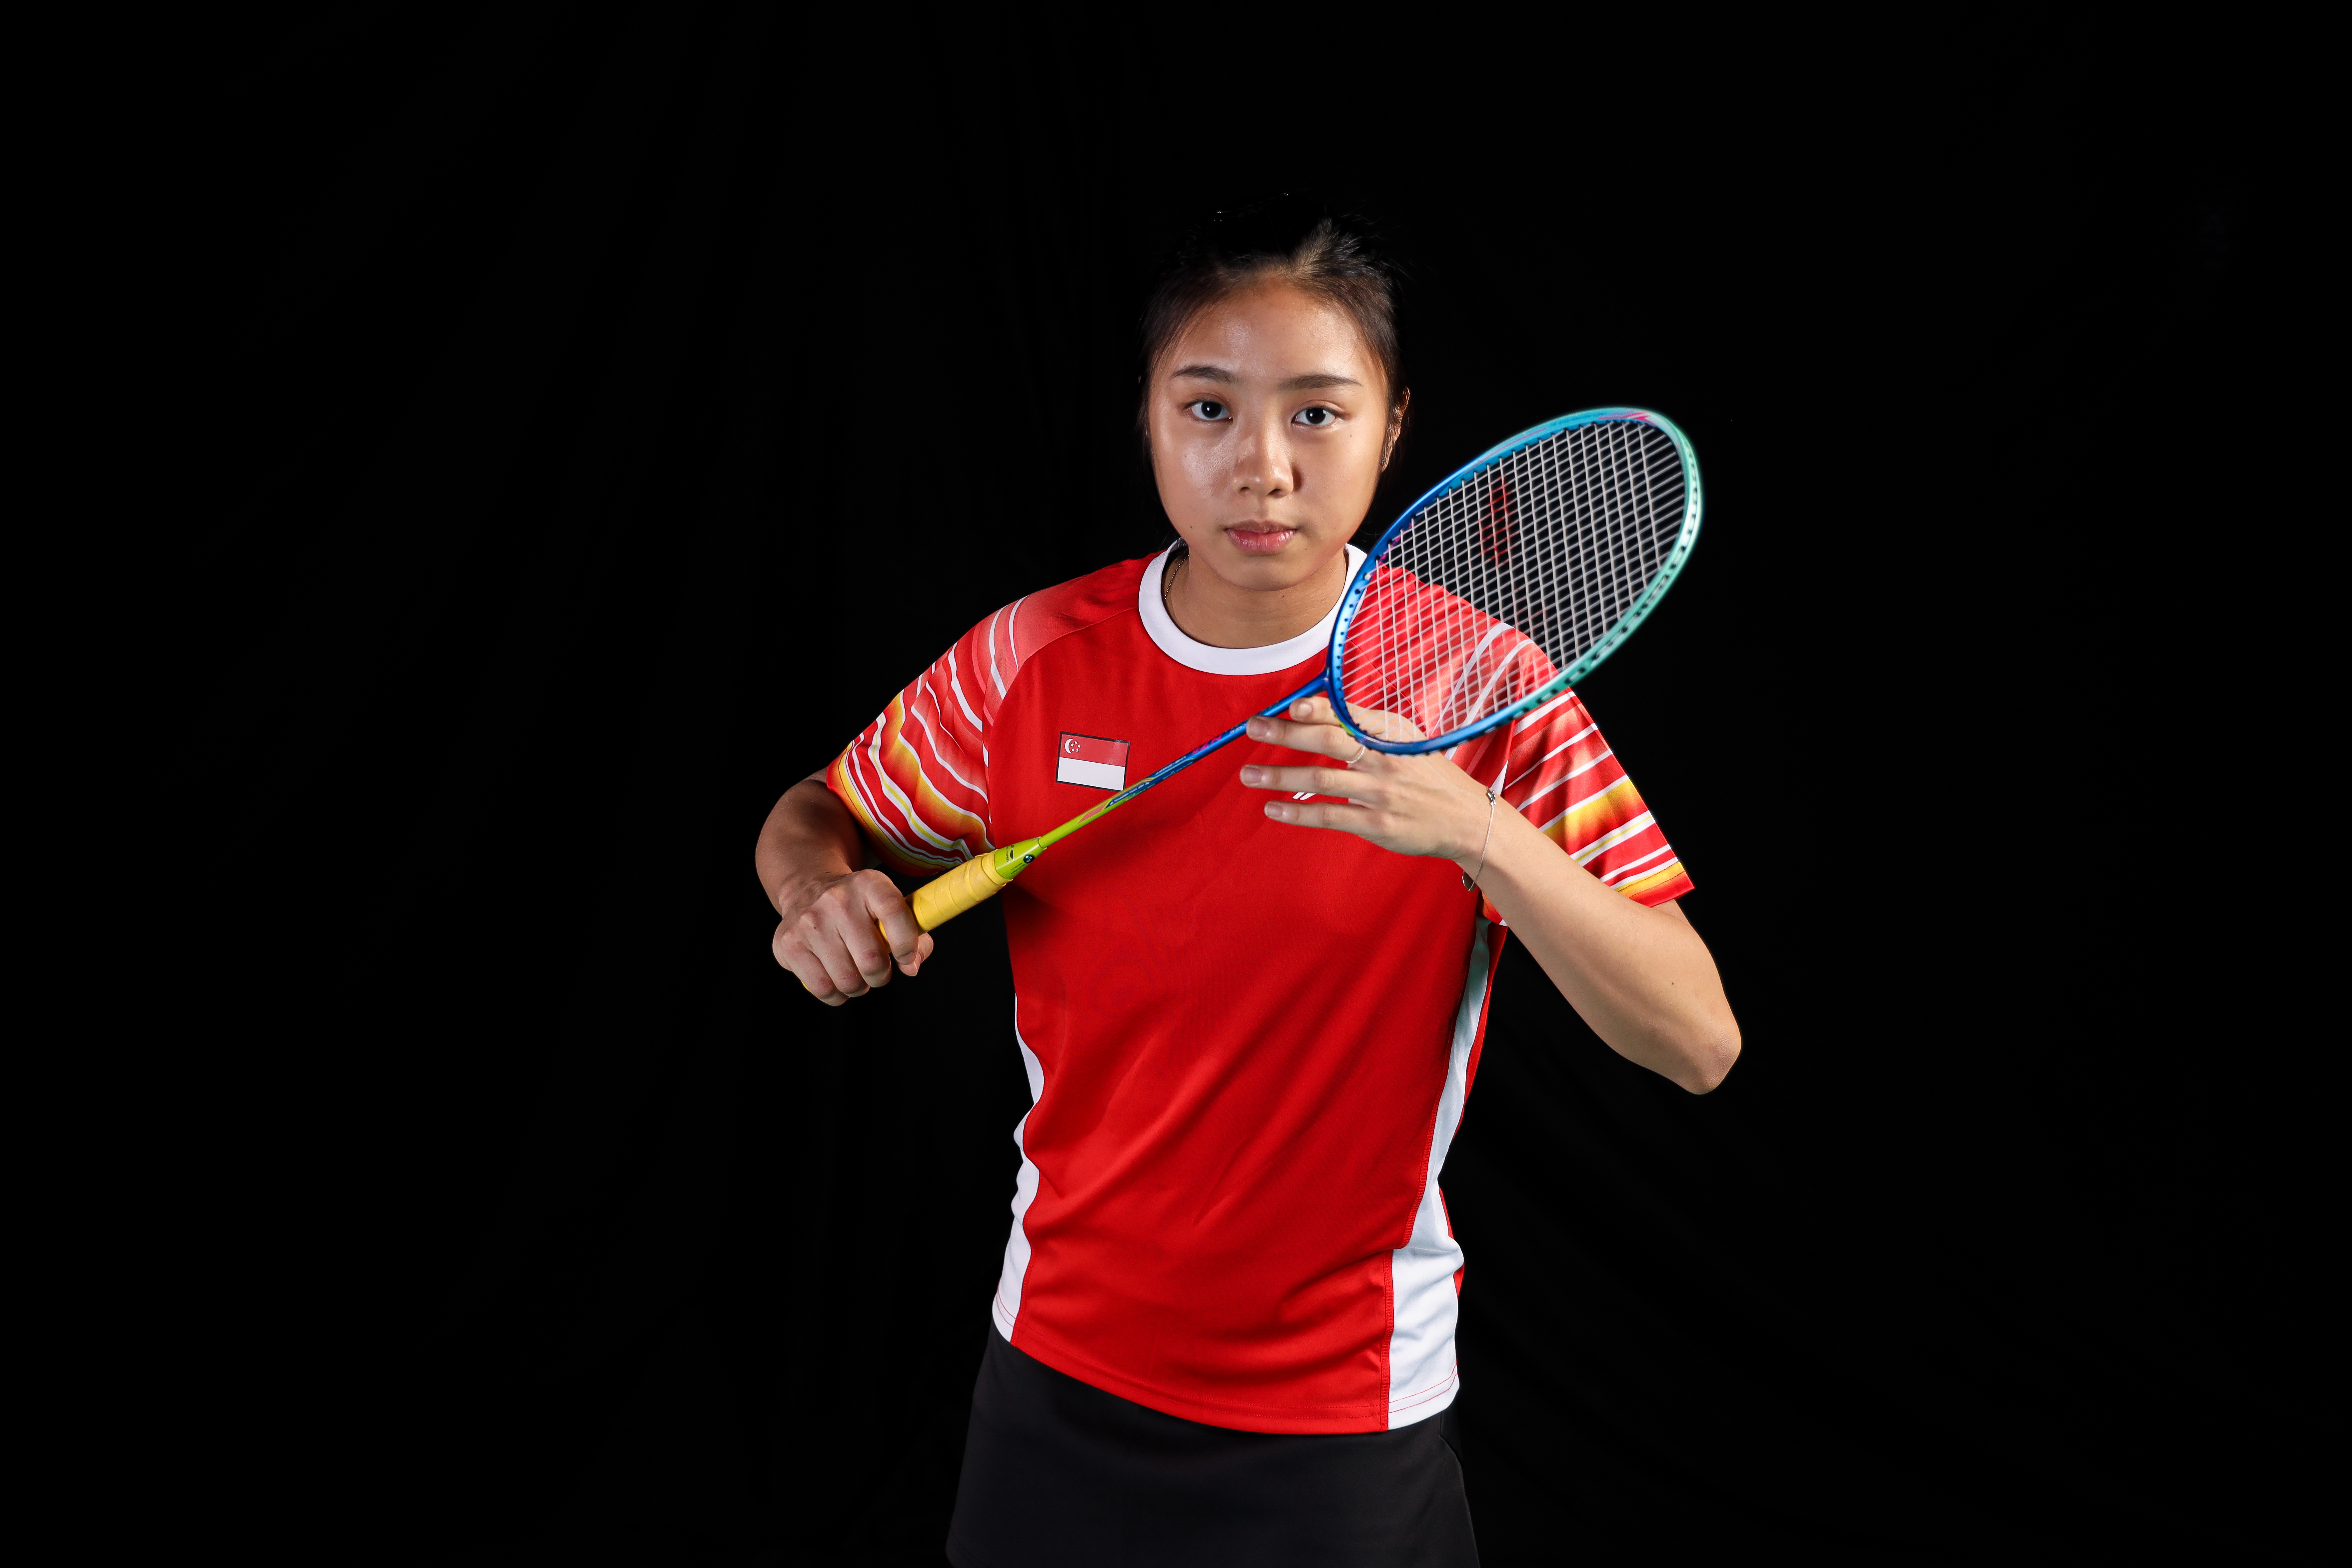 TeamSG Shuttler Yeo Jia Min : Even though it's my Olympic debut, I hope Singaporeans will watch me fight in every match and also enjoy the Games!